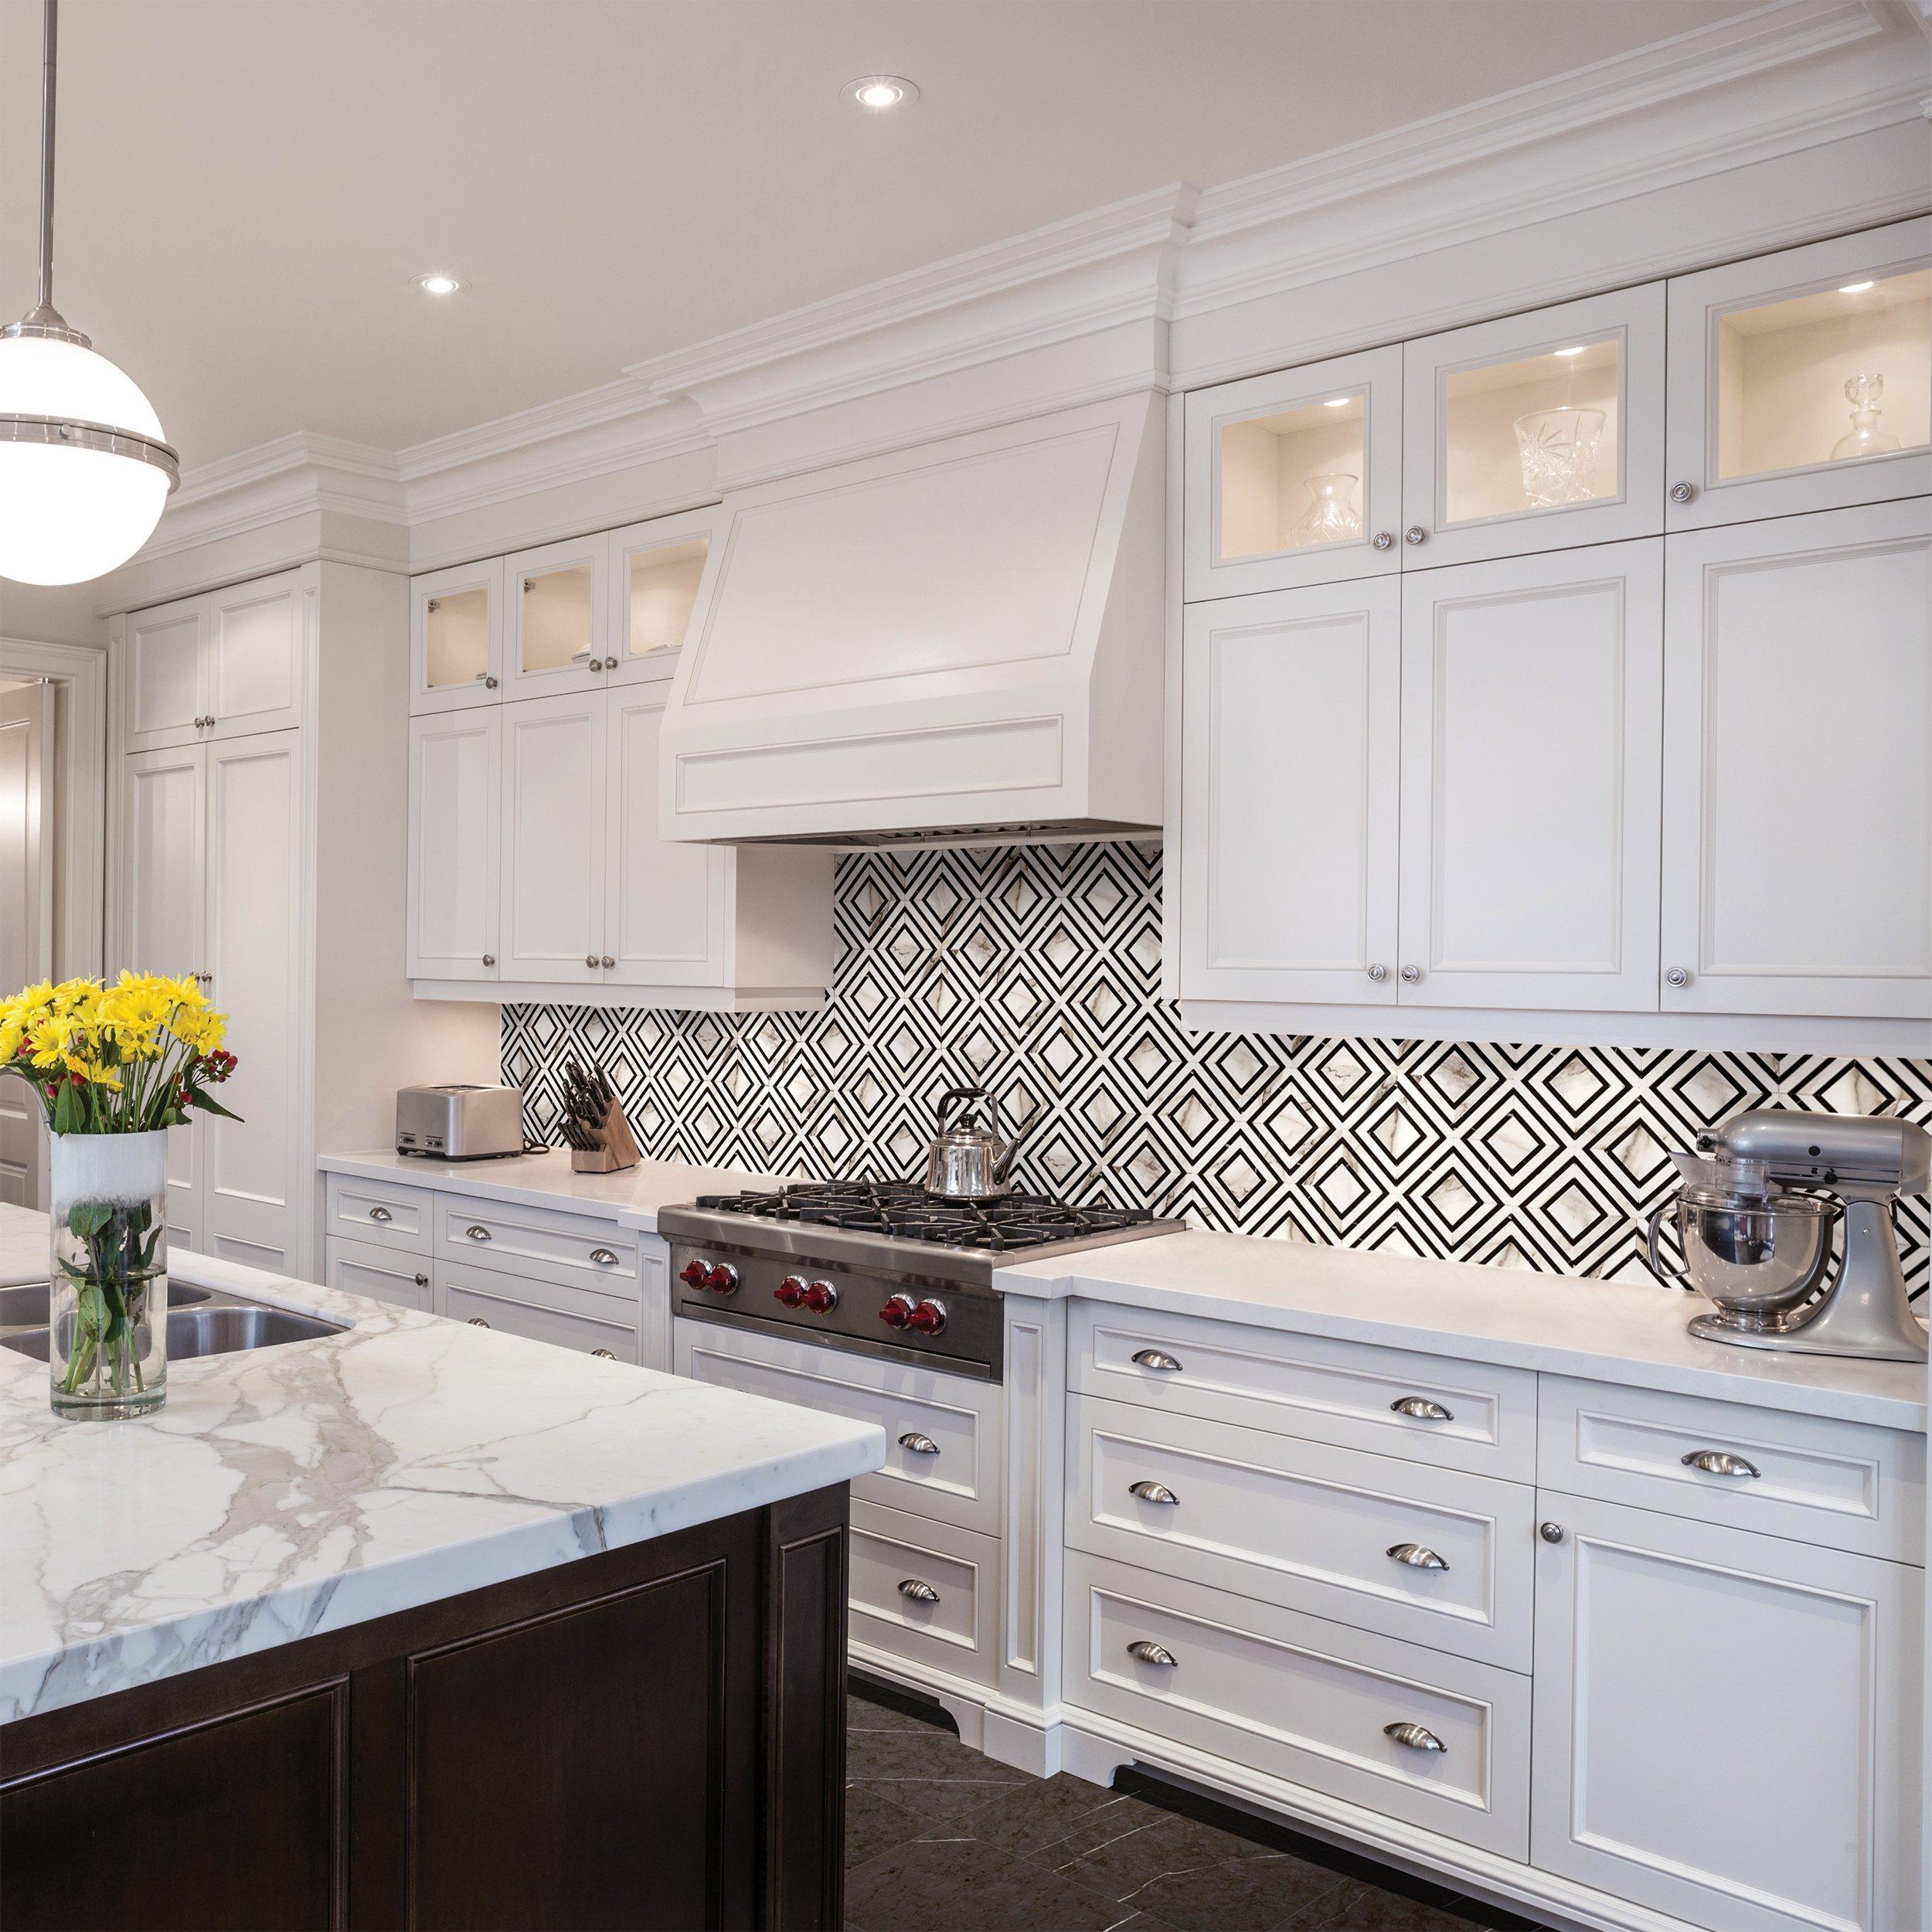 How To Coordinate Your Backsplash And Countertop